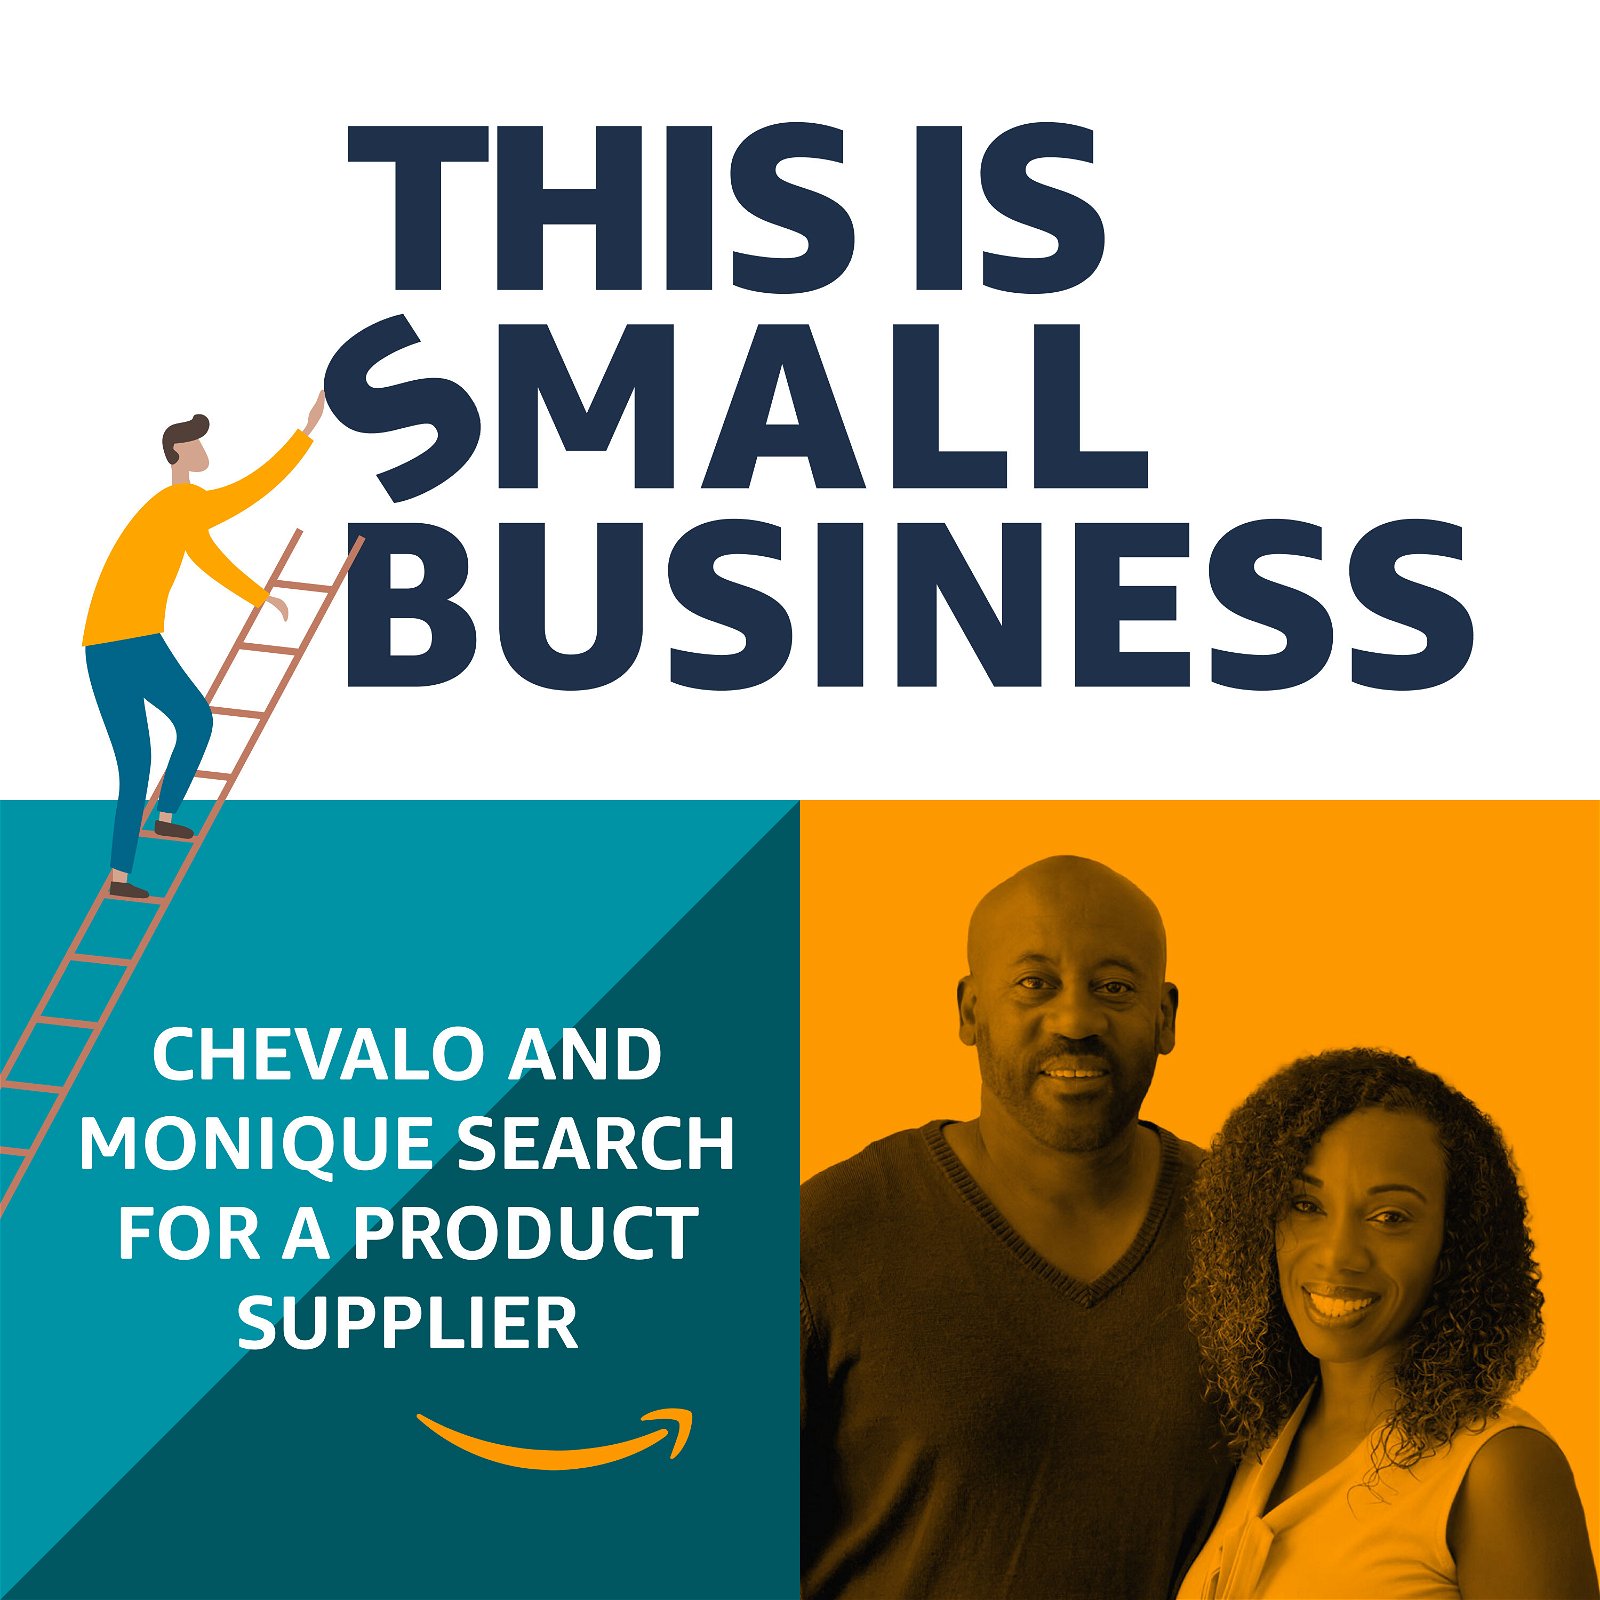 Chevalo and Monique Search for a Product Supplier